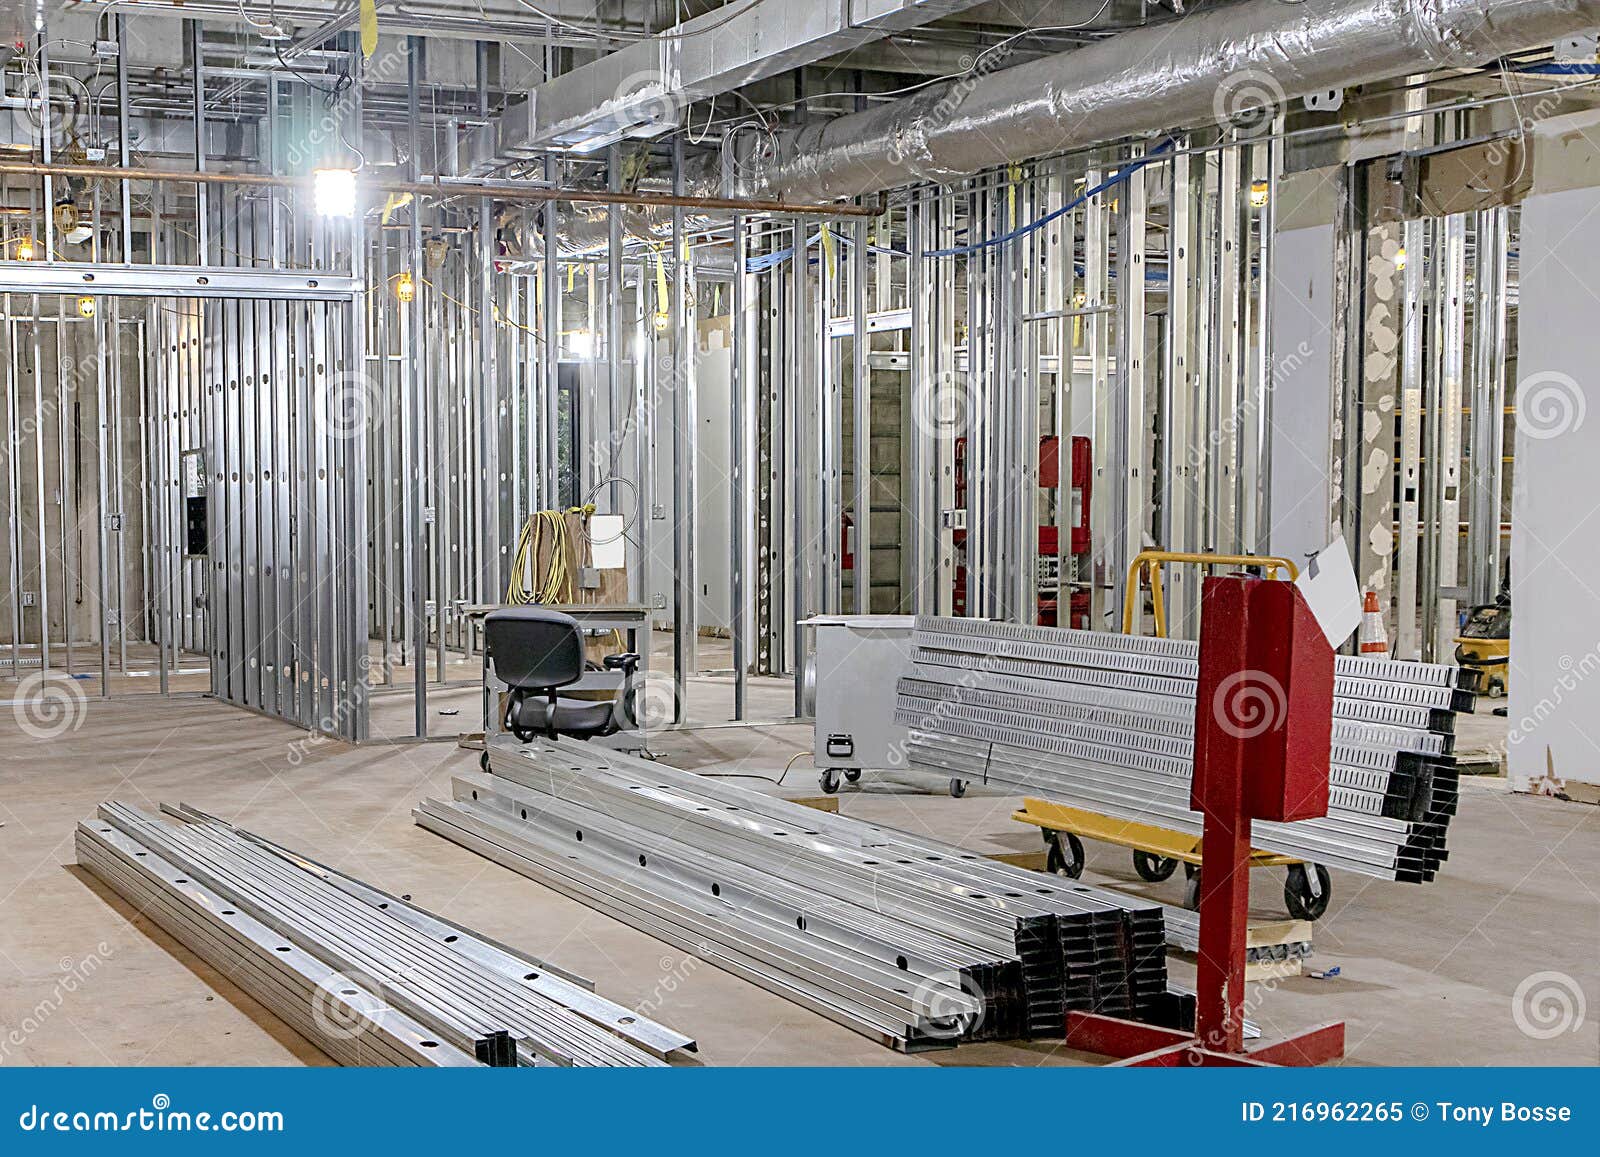 commercial building interior under construction with aluminum framing